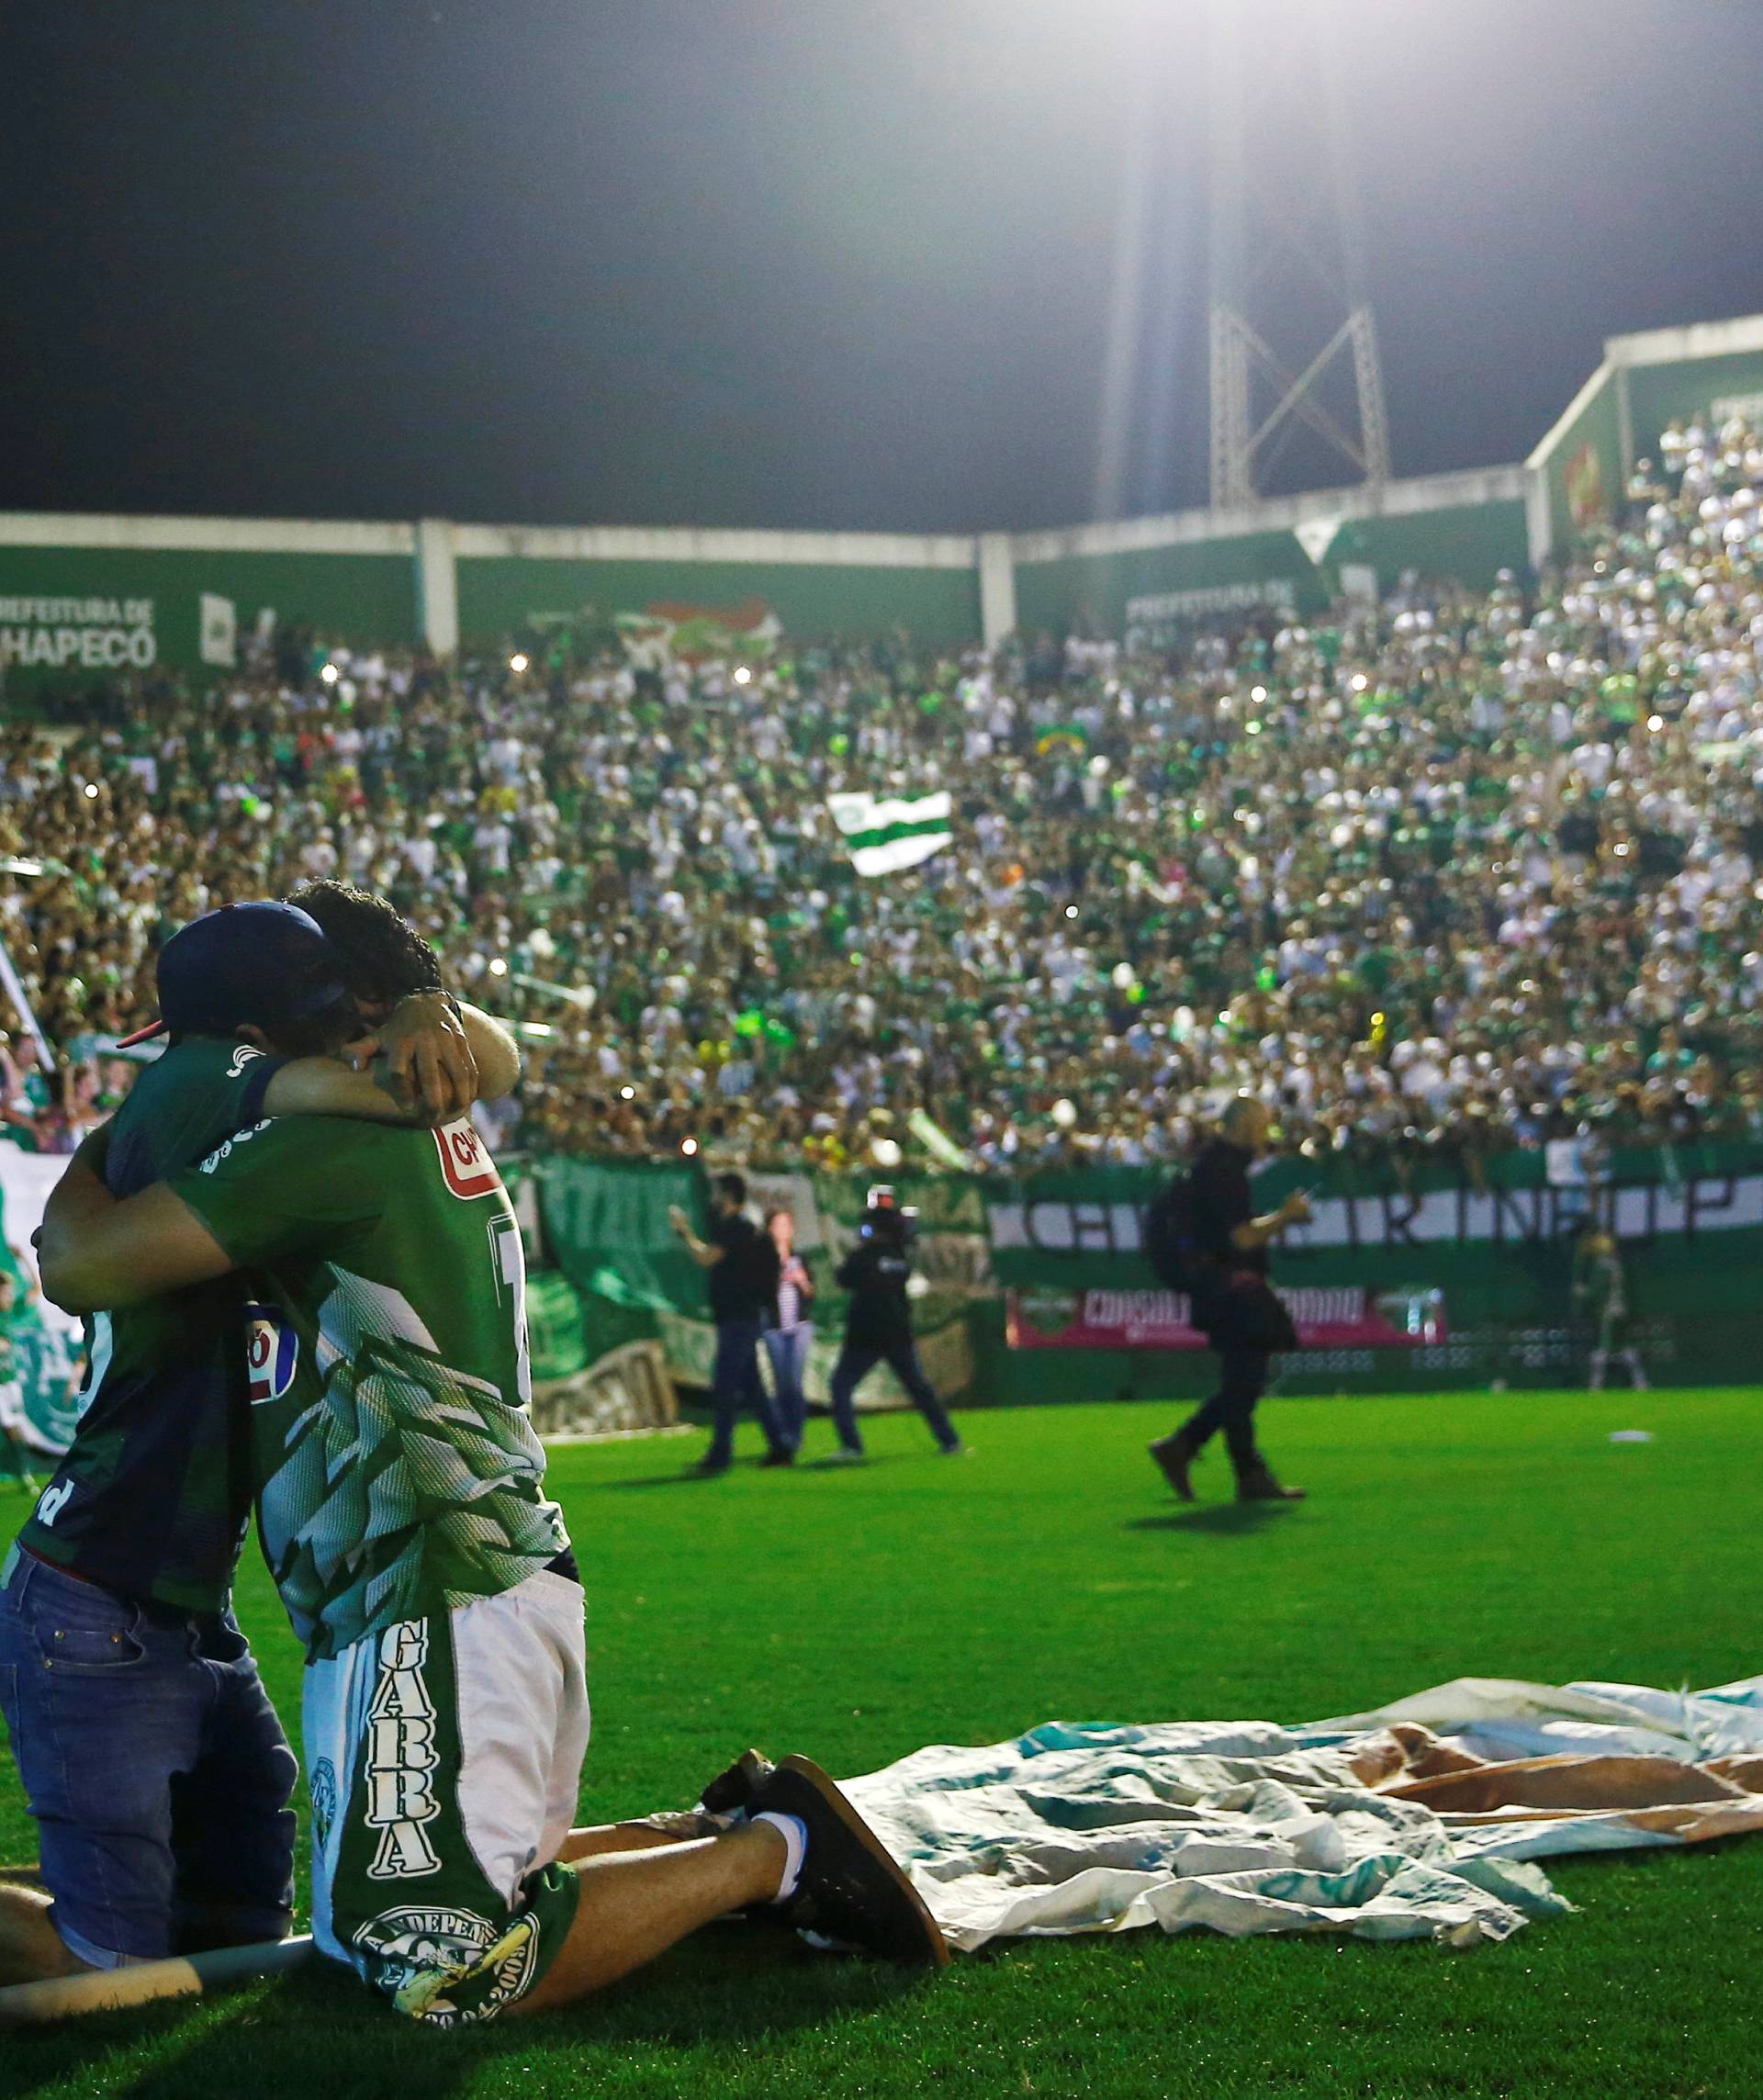 Fans of Chapecoense soccer team pay tribute to Chapecoense's players at the Arena Conda stadium in Chapeco